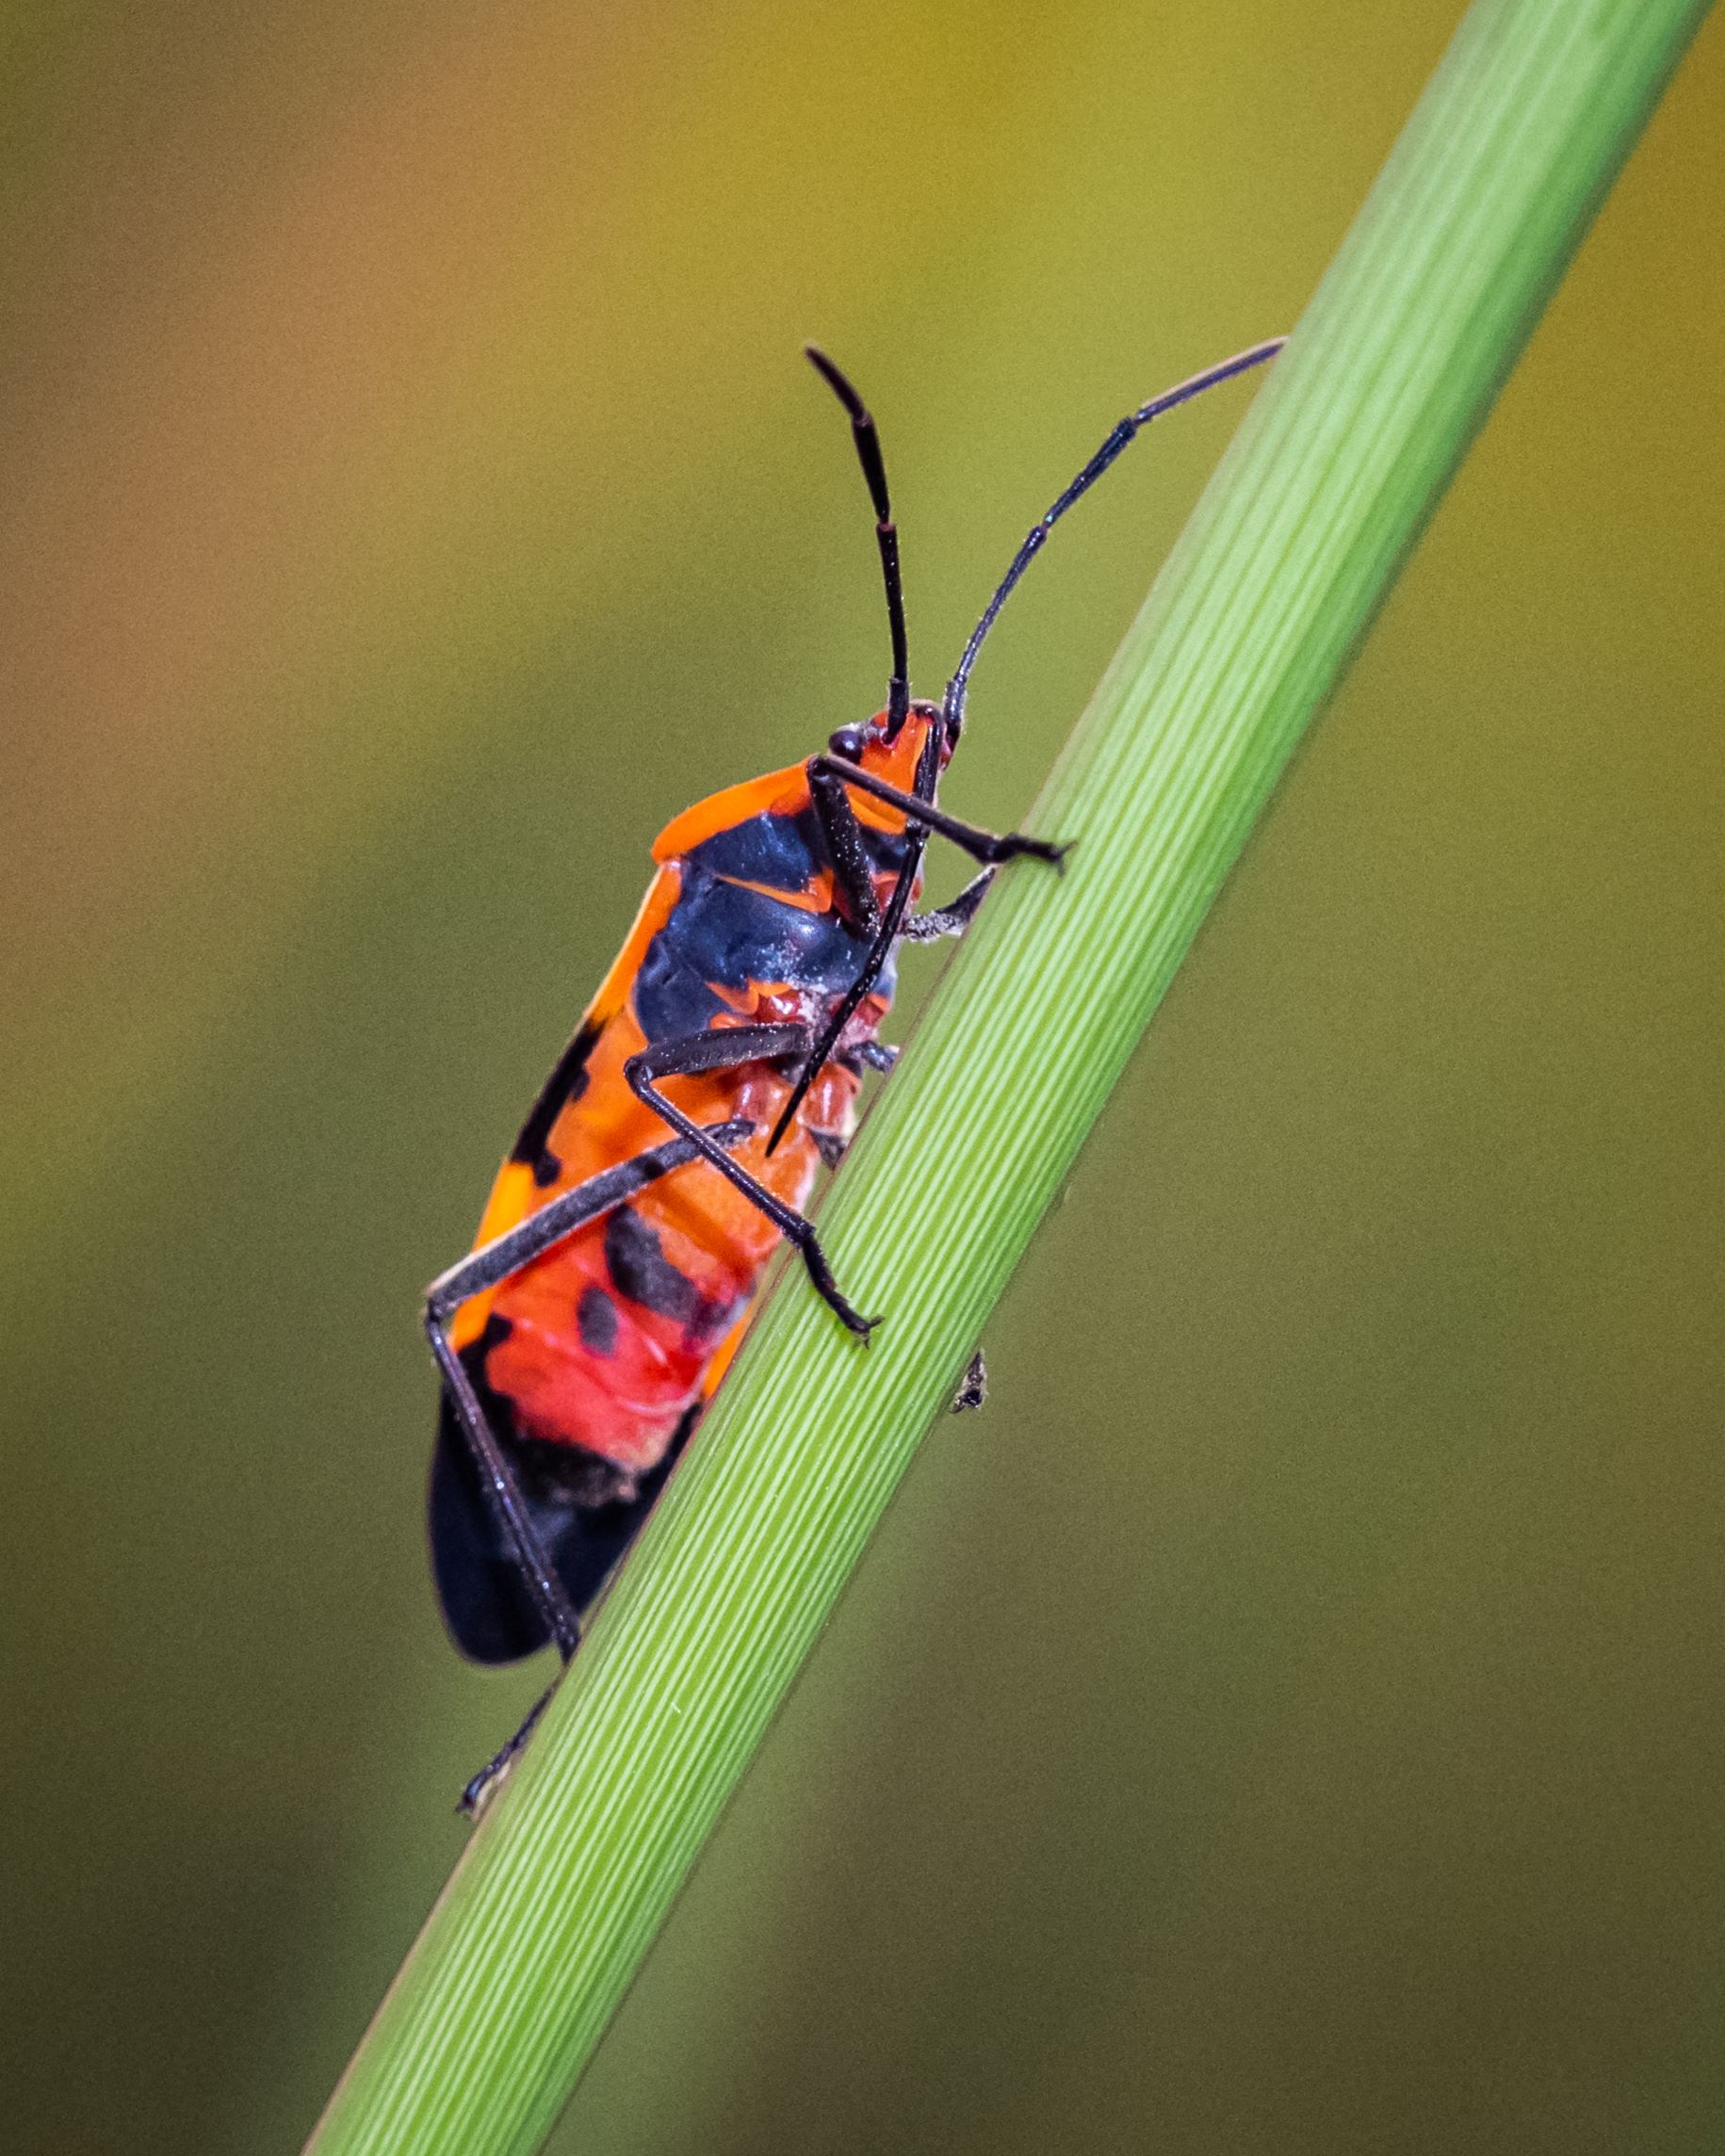 A red and black beetle